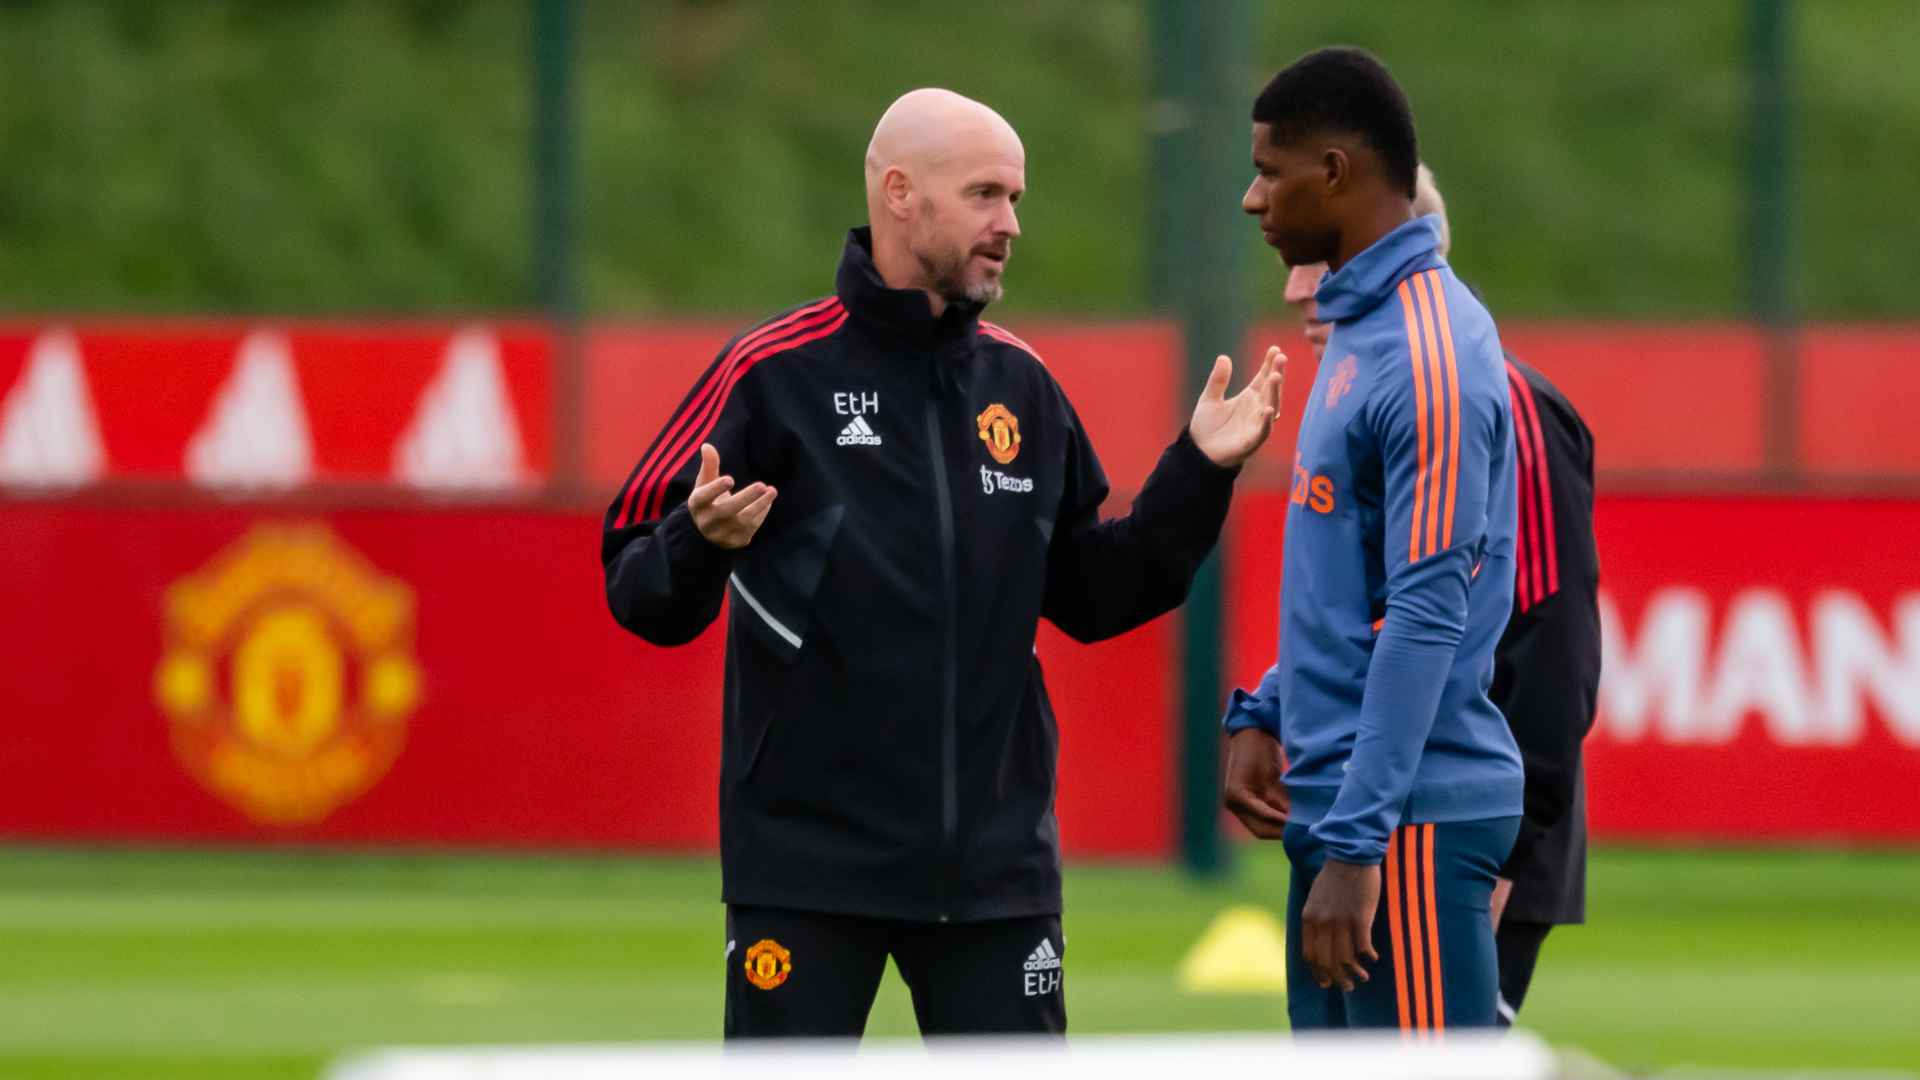 He can go to the moon for all I care' - Marcus Rashford defended amid Man  United star's controversial New York trip during international break